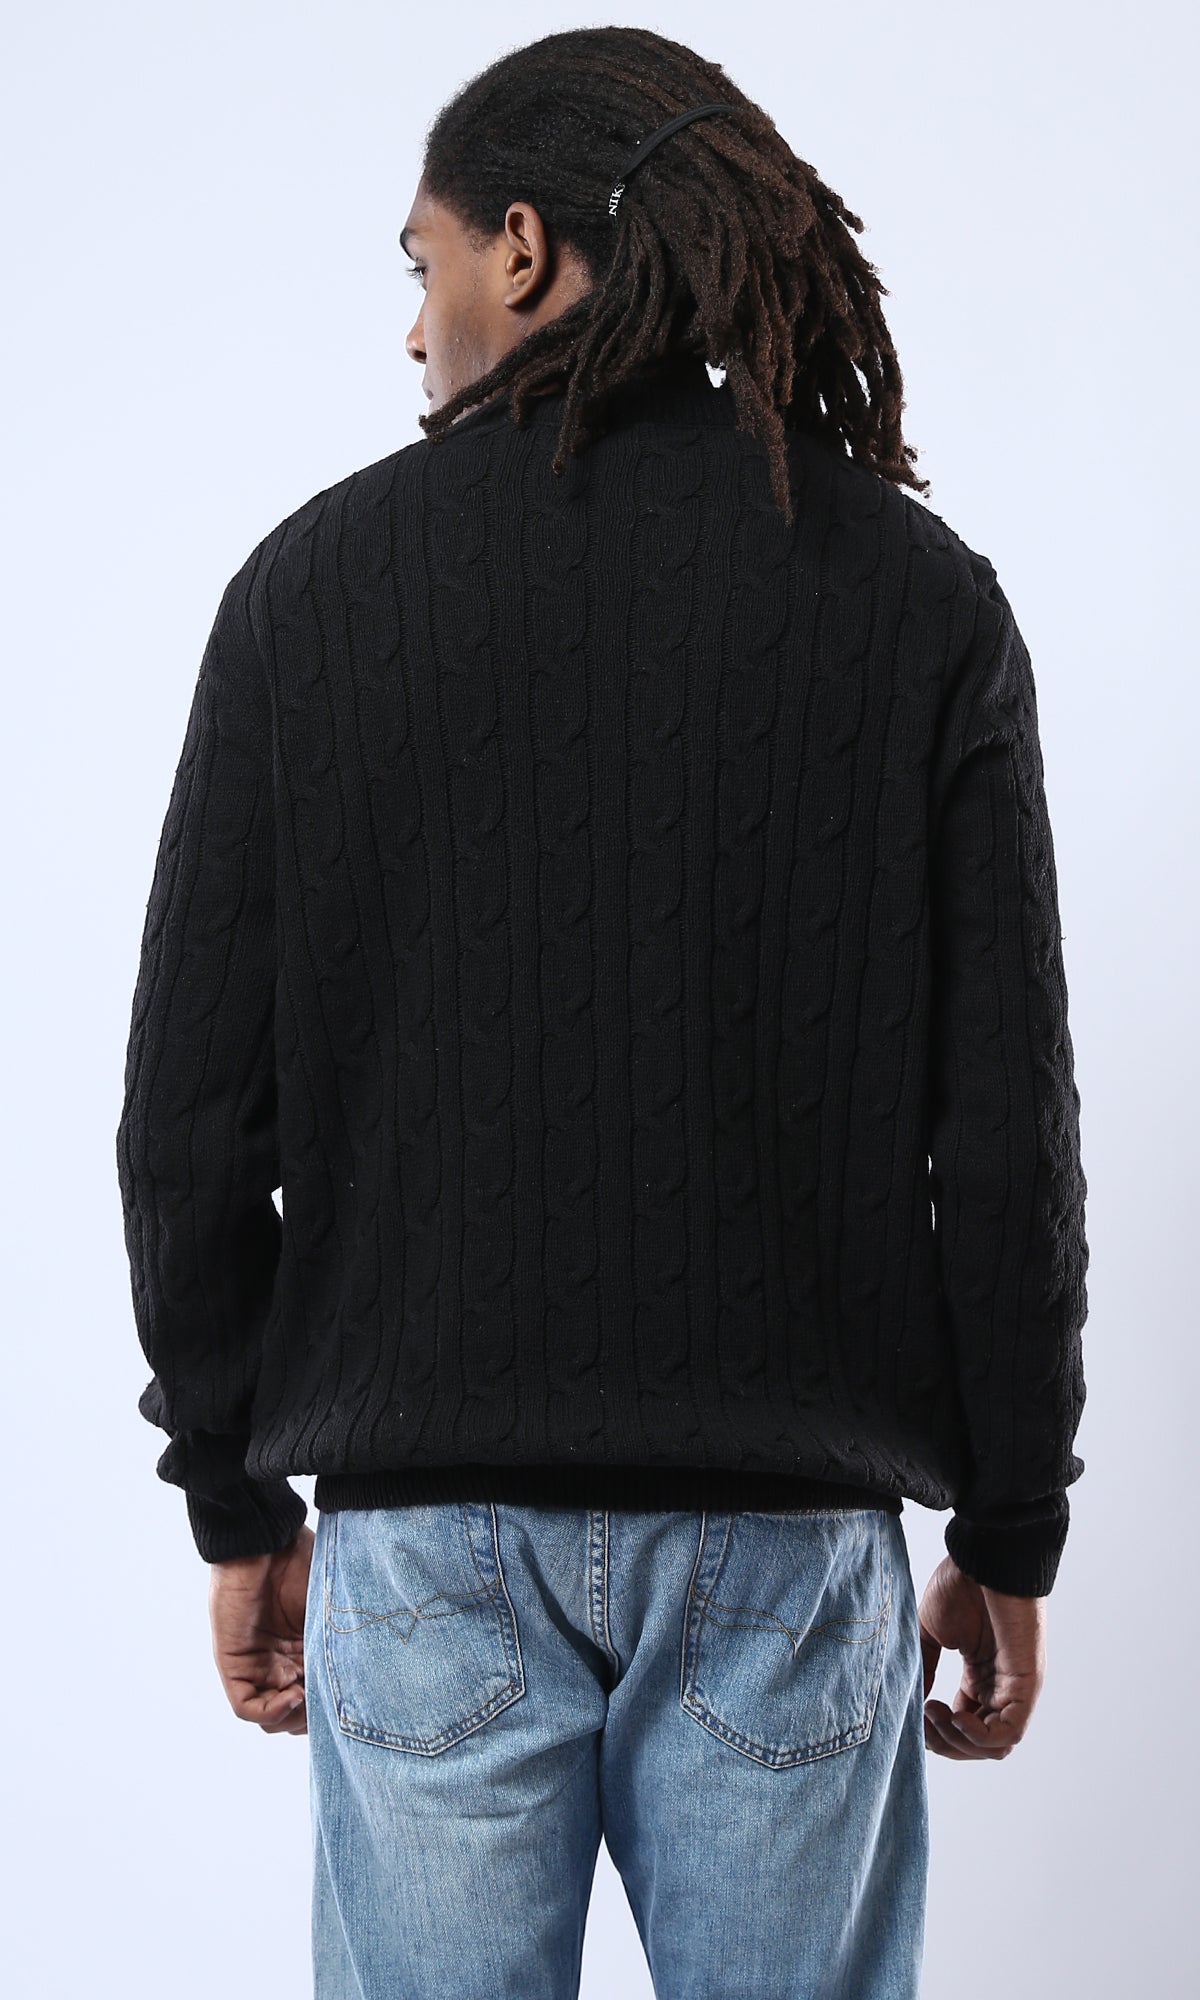 O175712 Round Neck Braided Knit Black Pullover